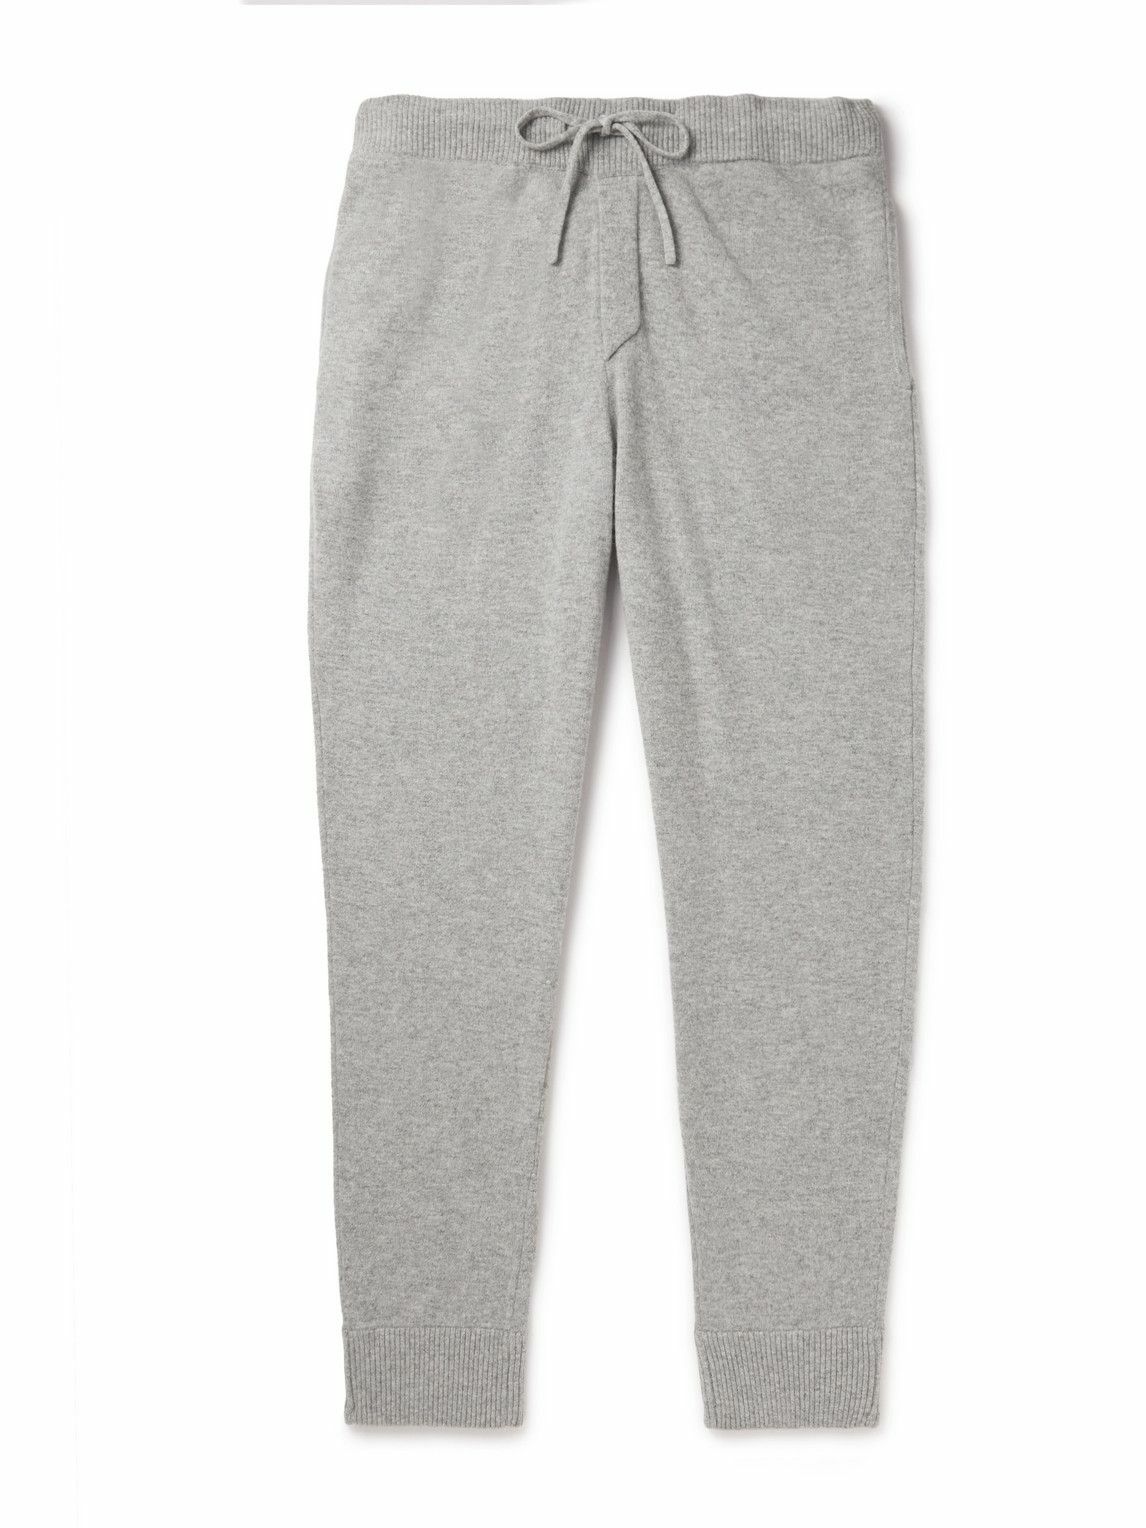 Onia - Tapered Cashmere Sweatpants - Gray Onia